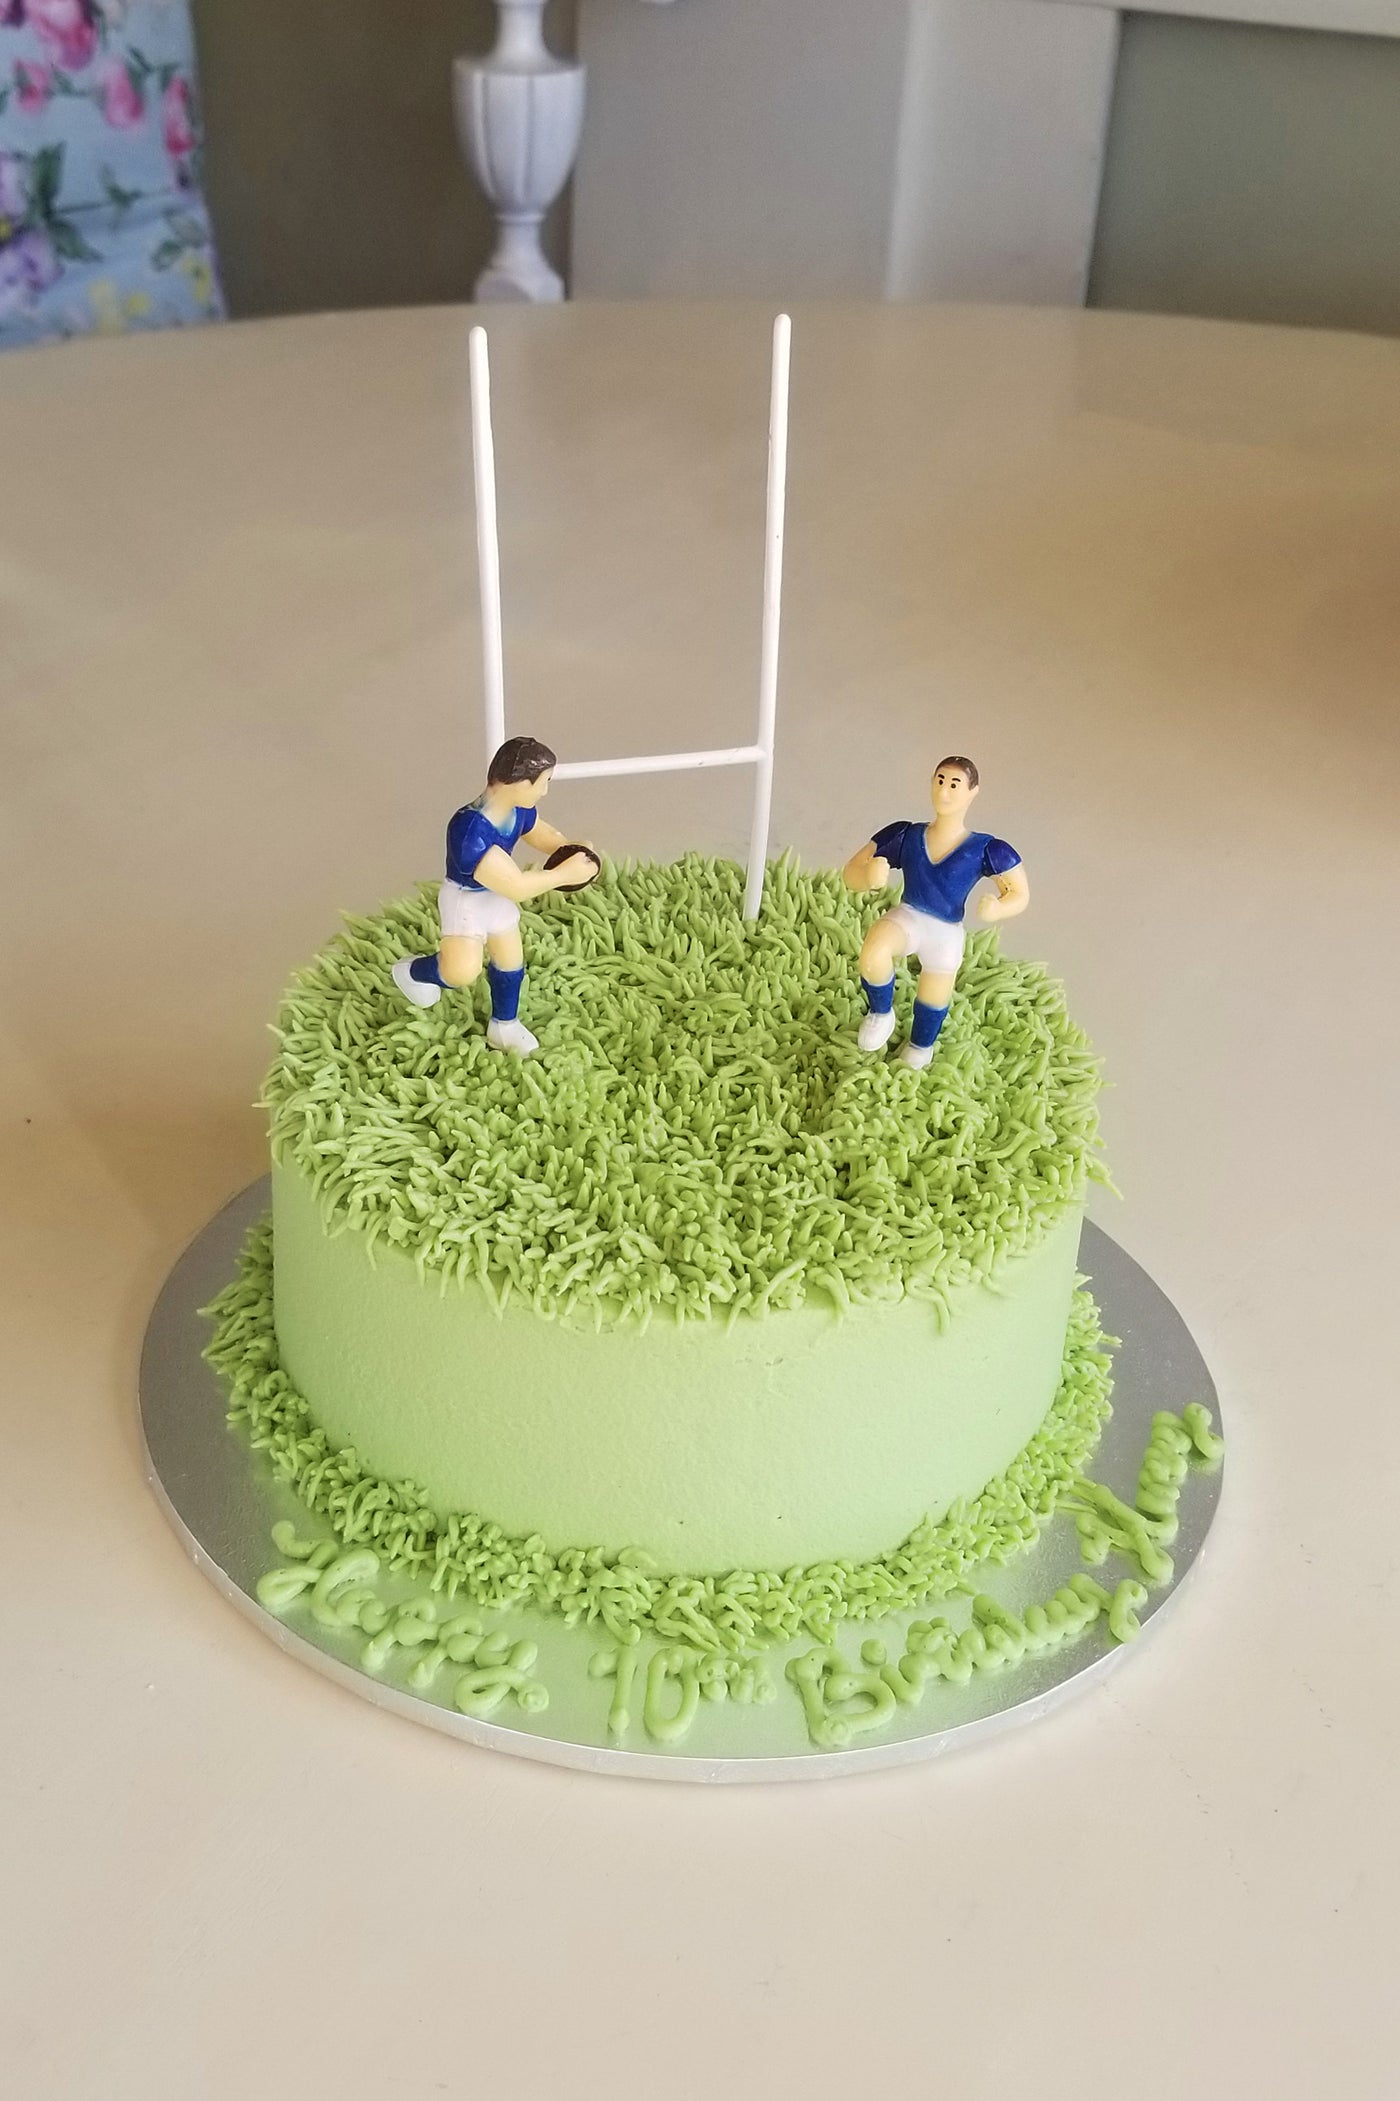 Football field cake in Surulere - Party, Catering & Event, DAMMY  CONFECTIONERY | Find more Party, Catering & Event services online from  olist.ng